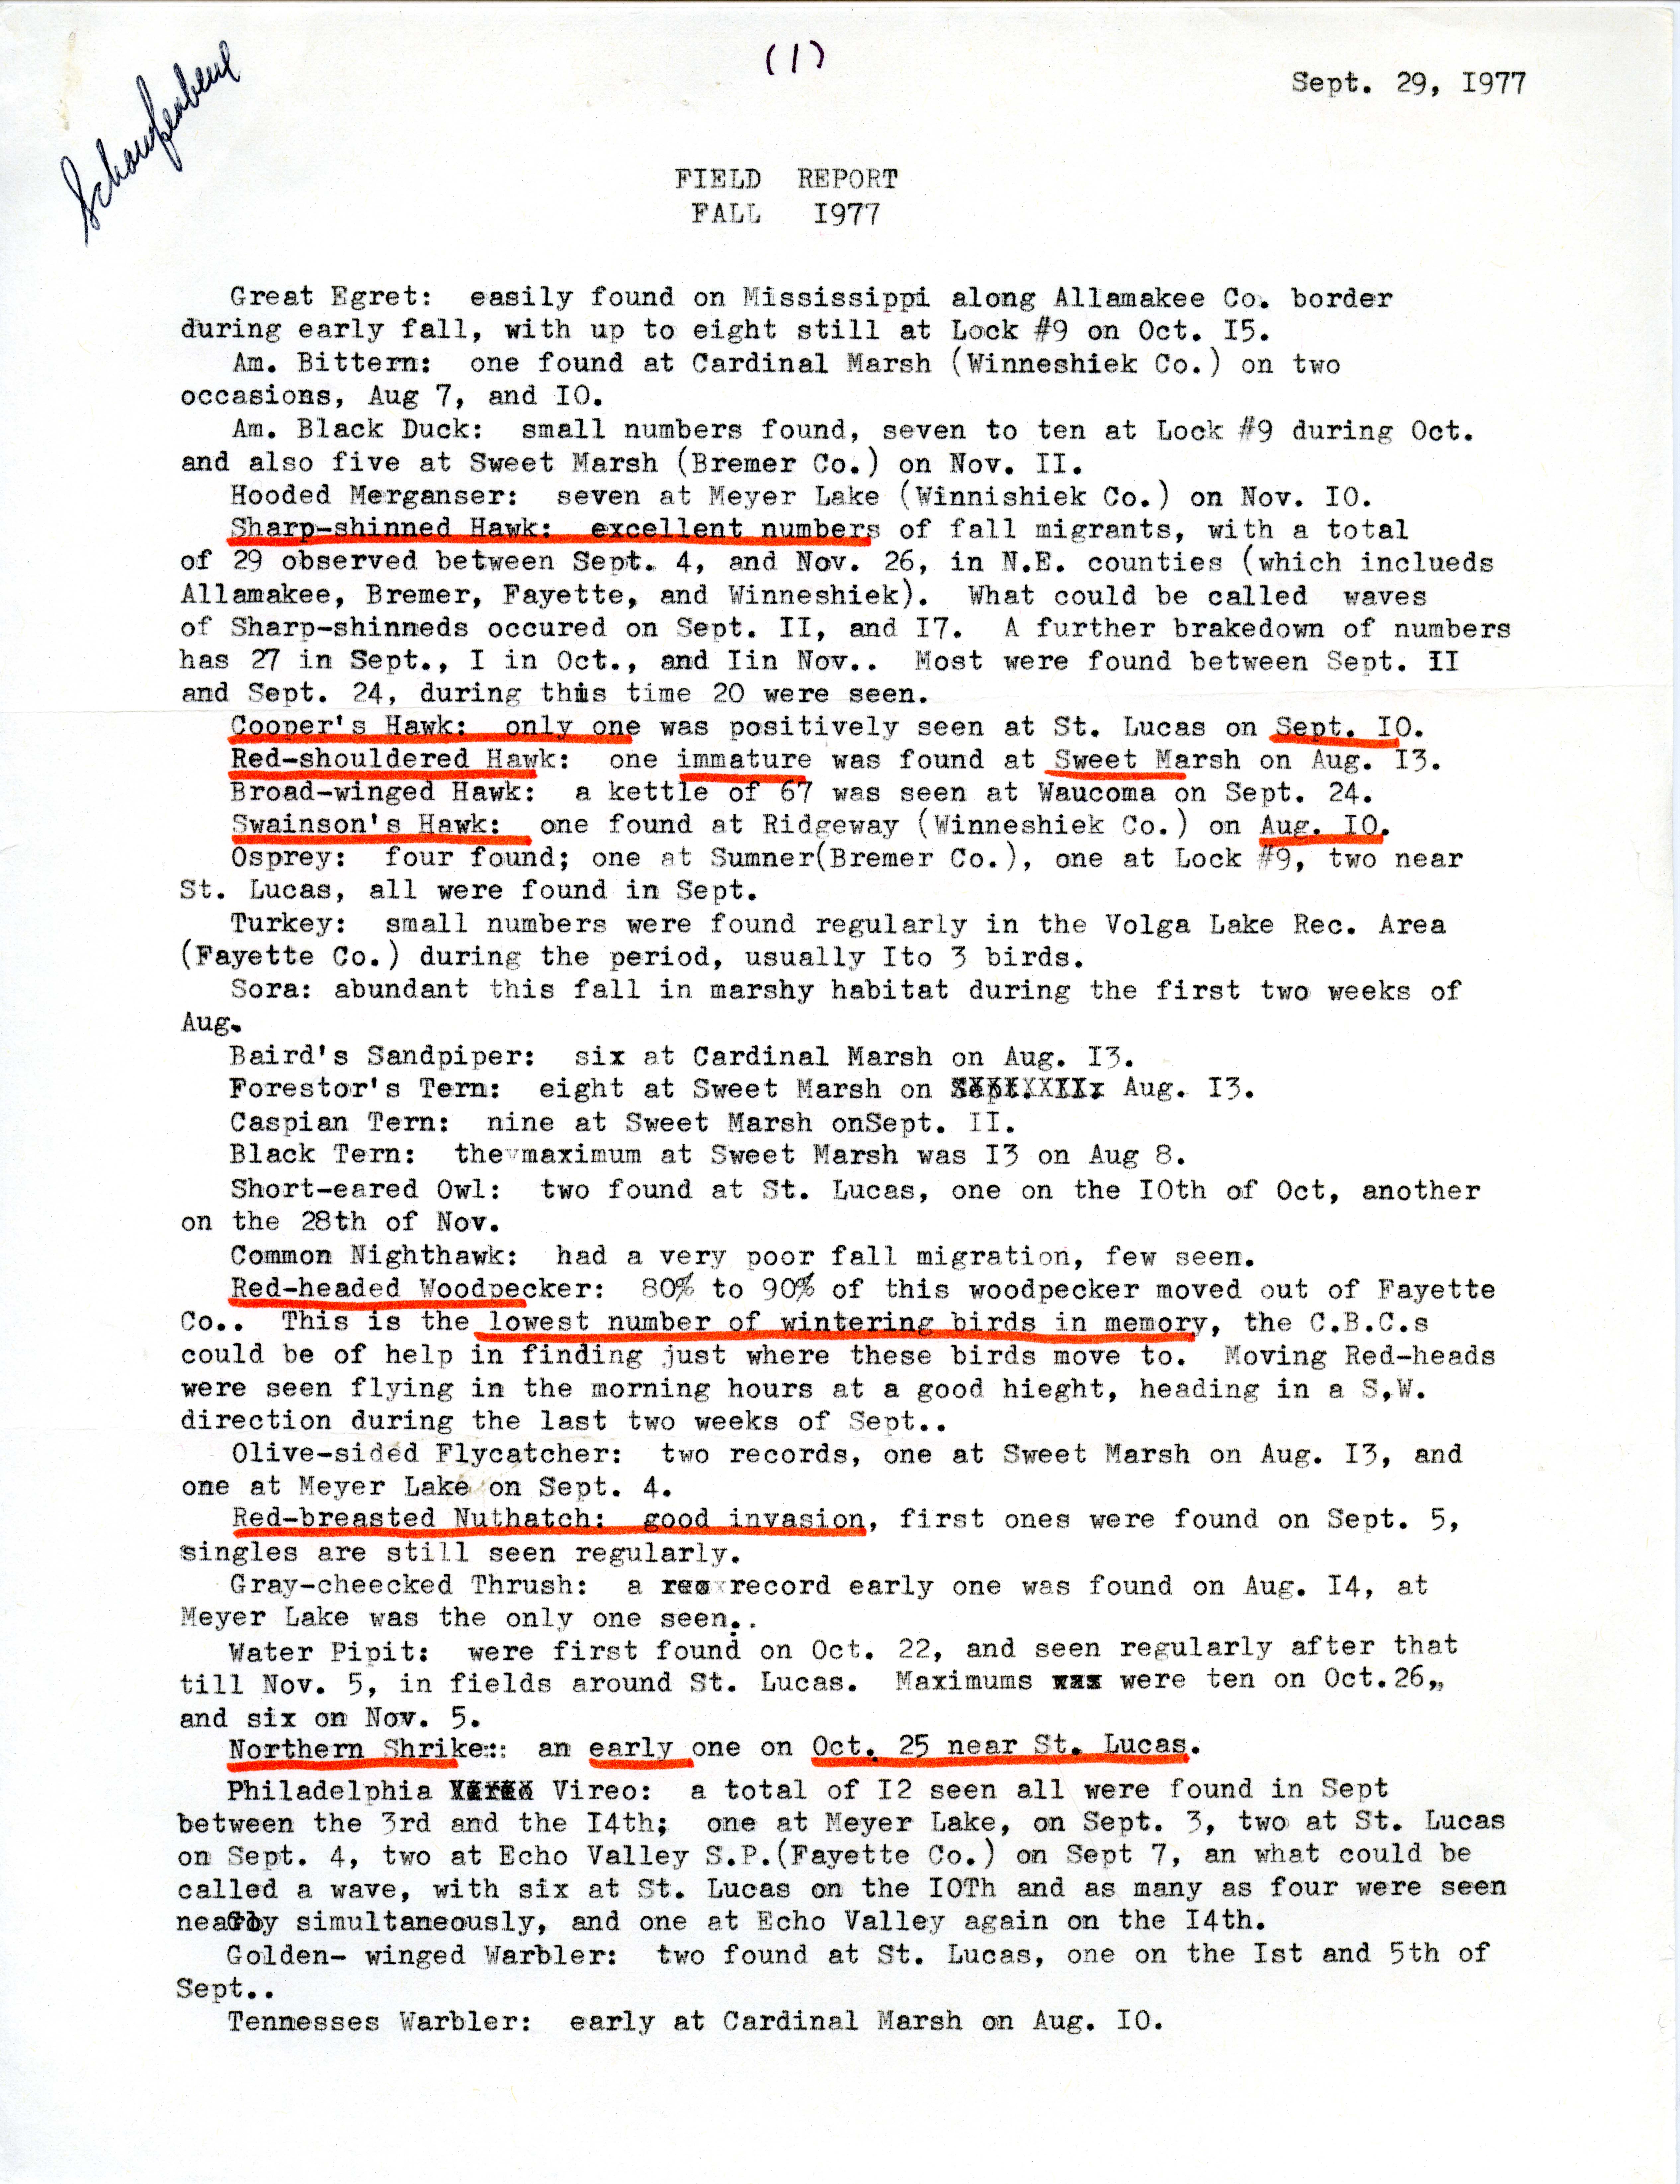 Field notes contributed by Joseph P. Schaufenbuel, September 29, 1977